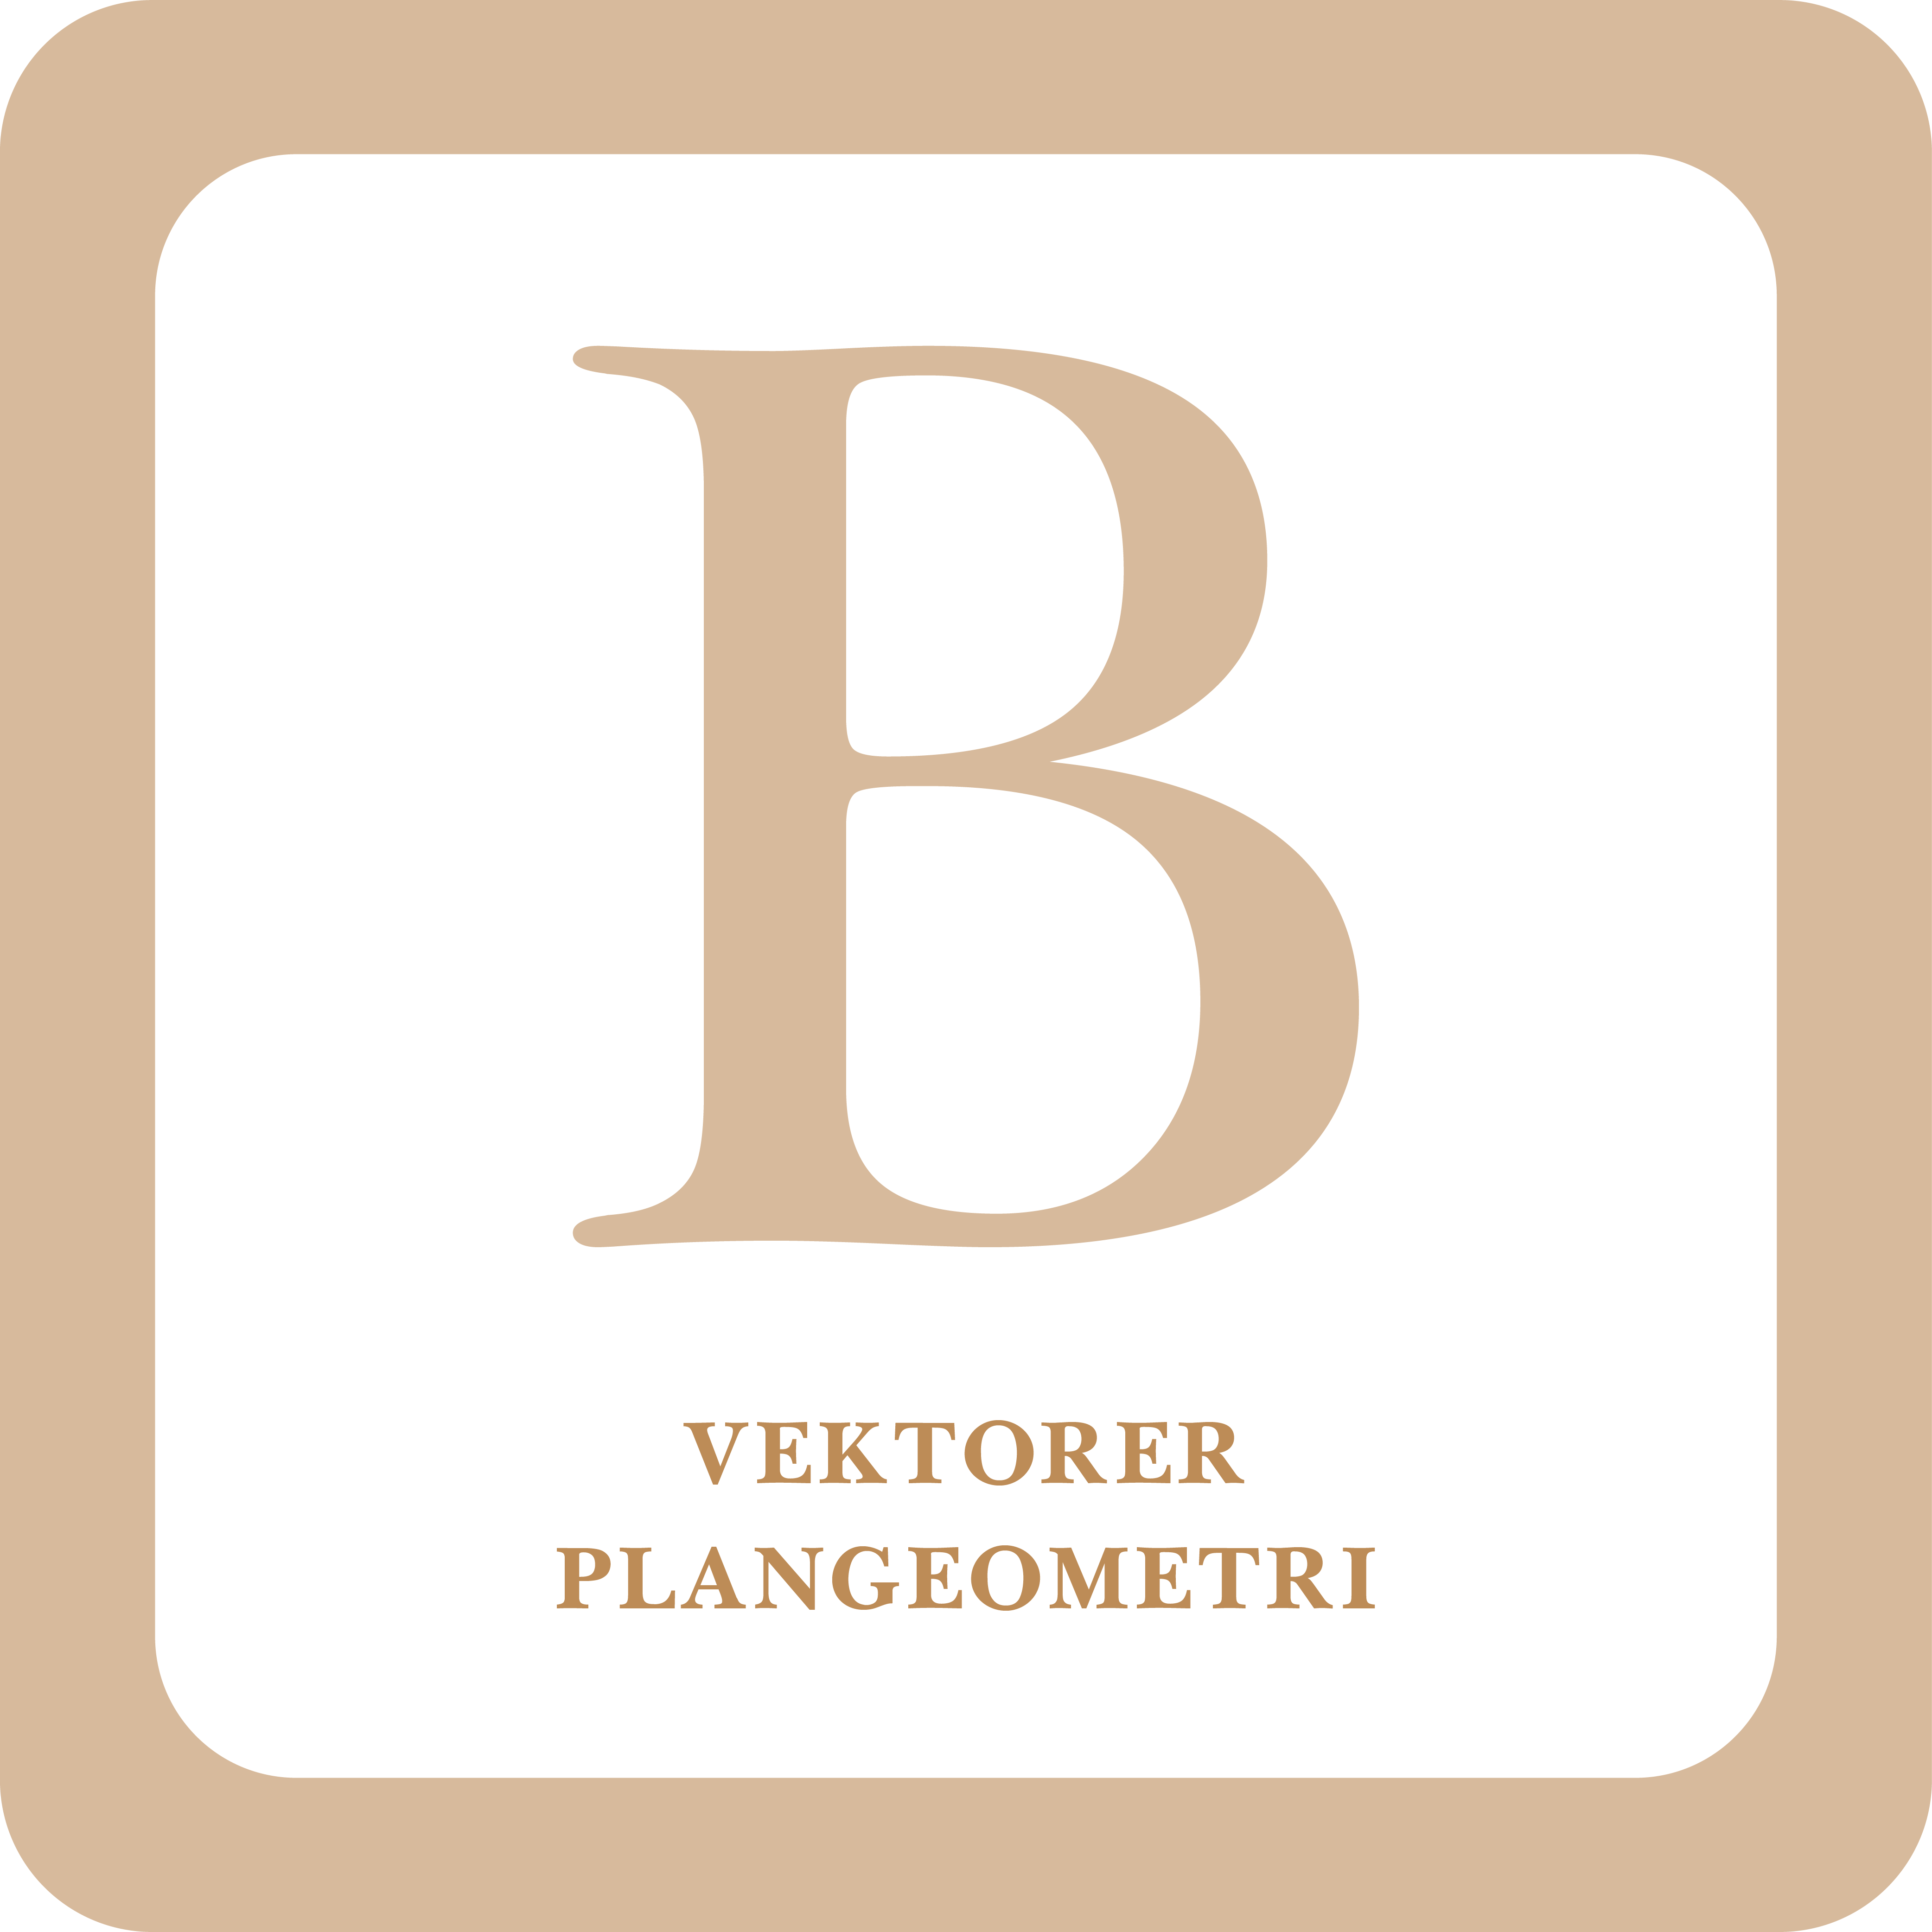 Read more about the article Vektorer Plangeometri